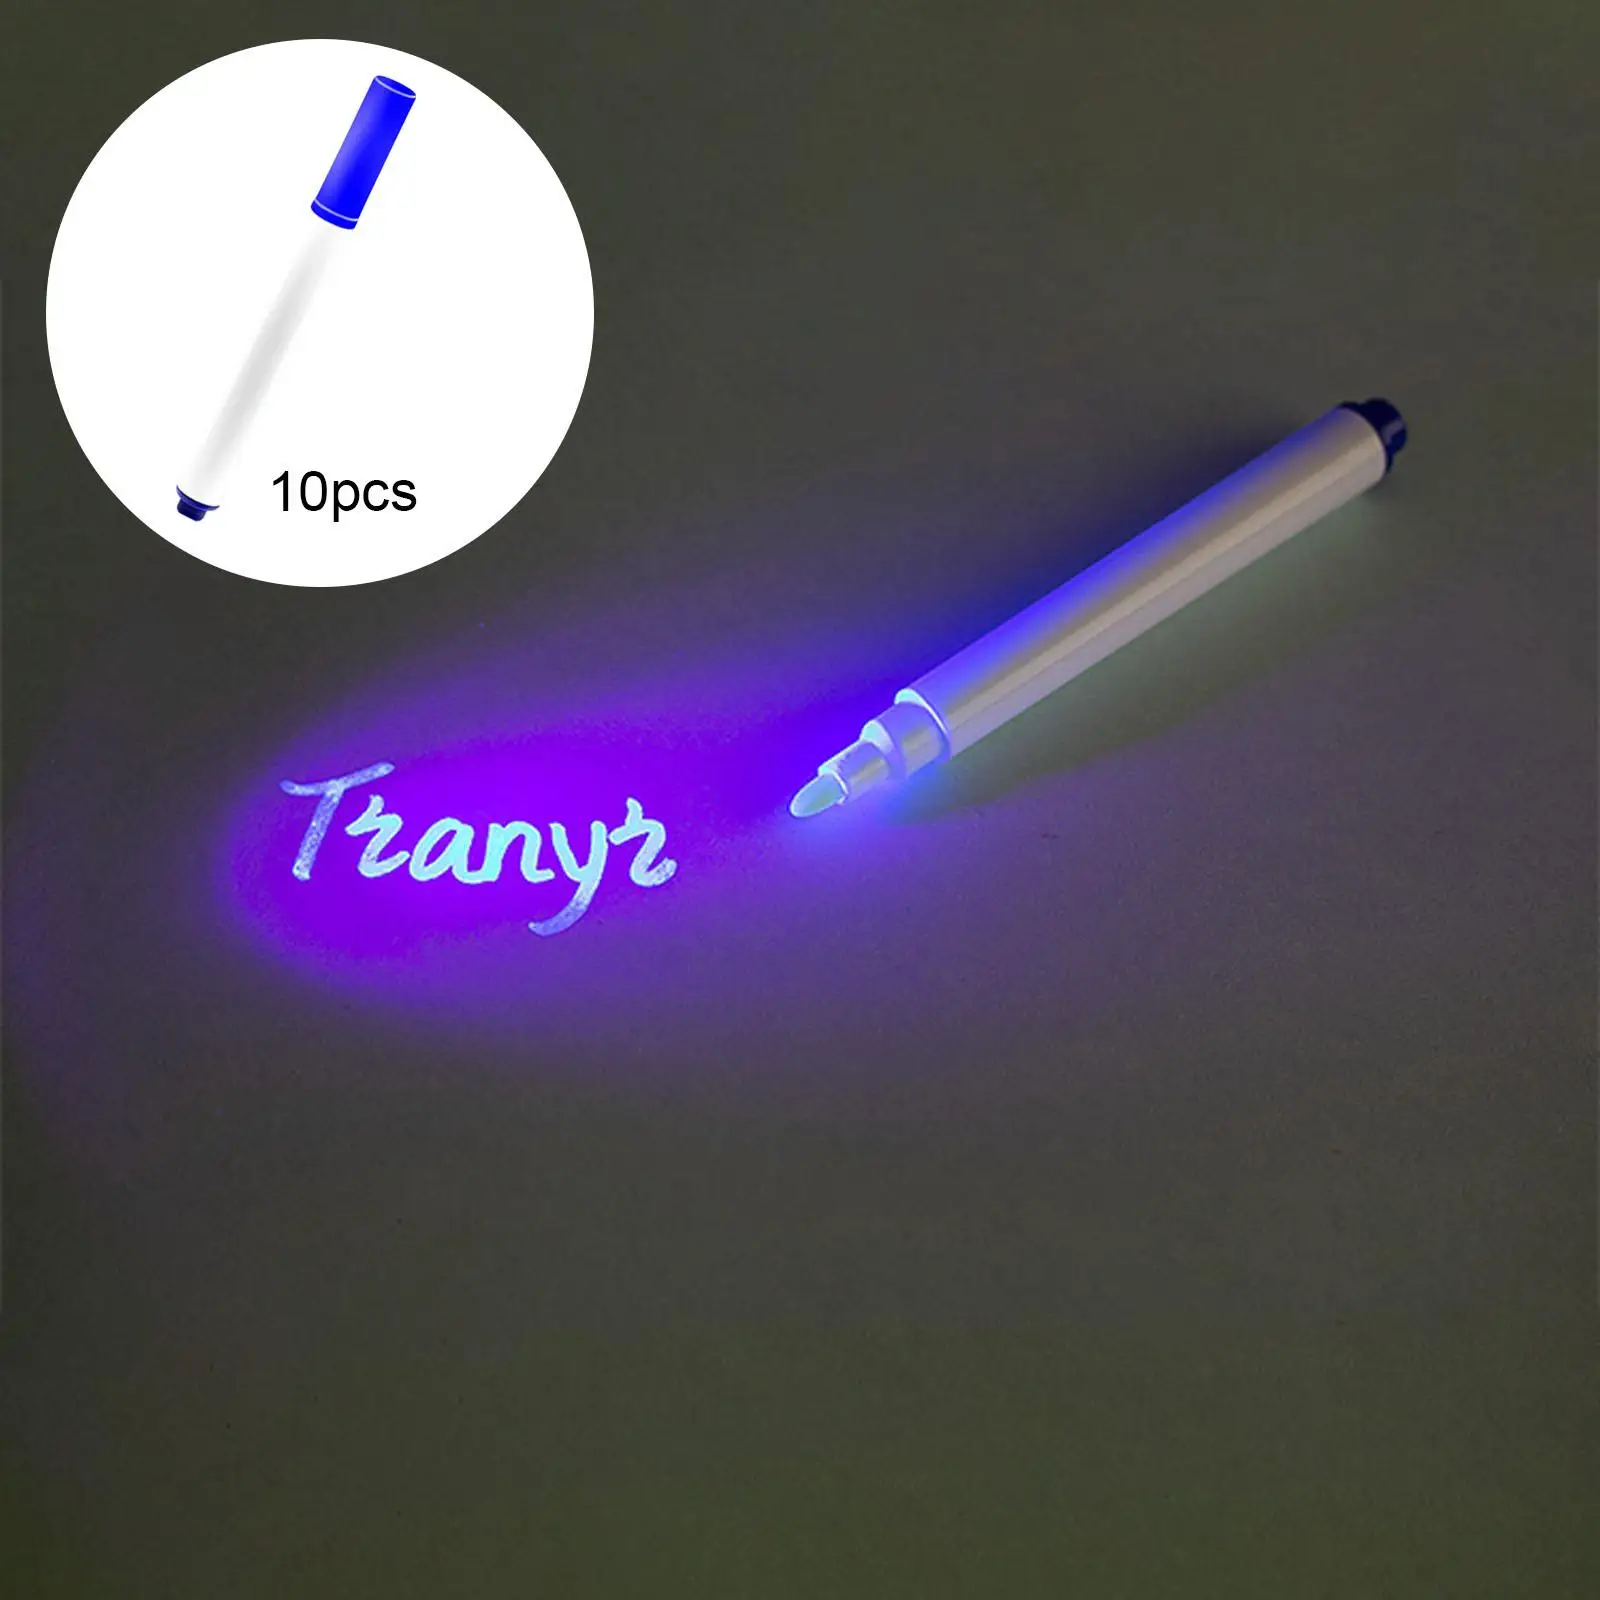 10x Invisible Ink Pen Marker Pens Writing 0.5cm Point Painting Drawing for Doodle Graffiti Birthday Party Bags Message